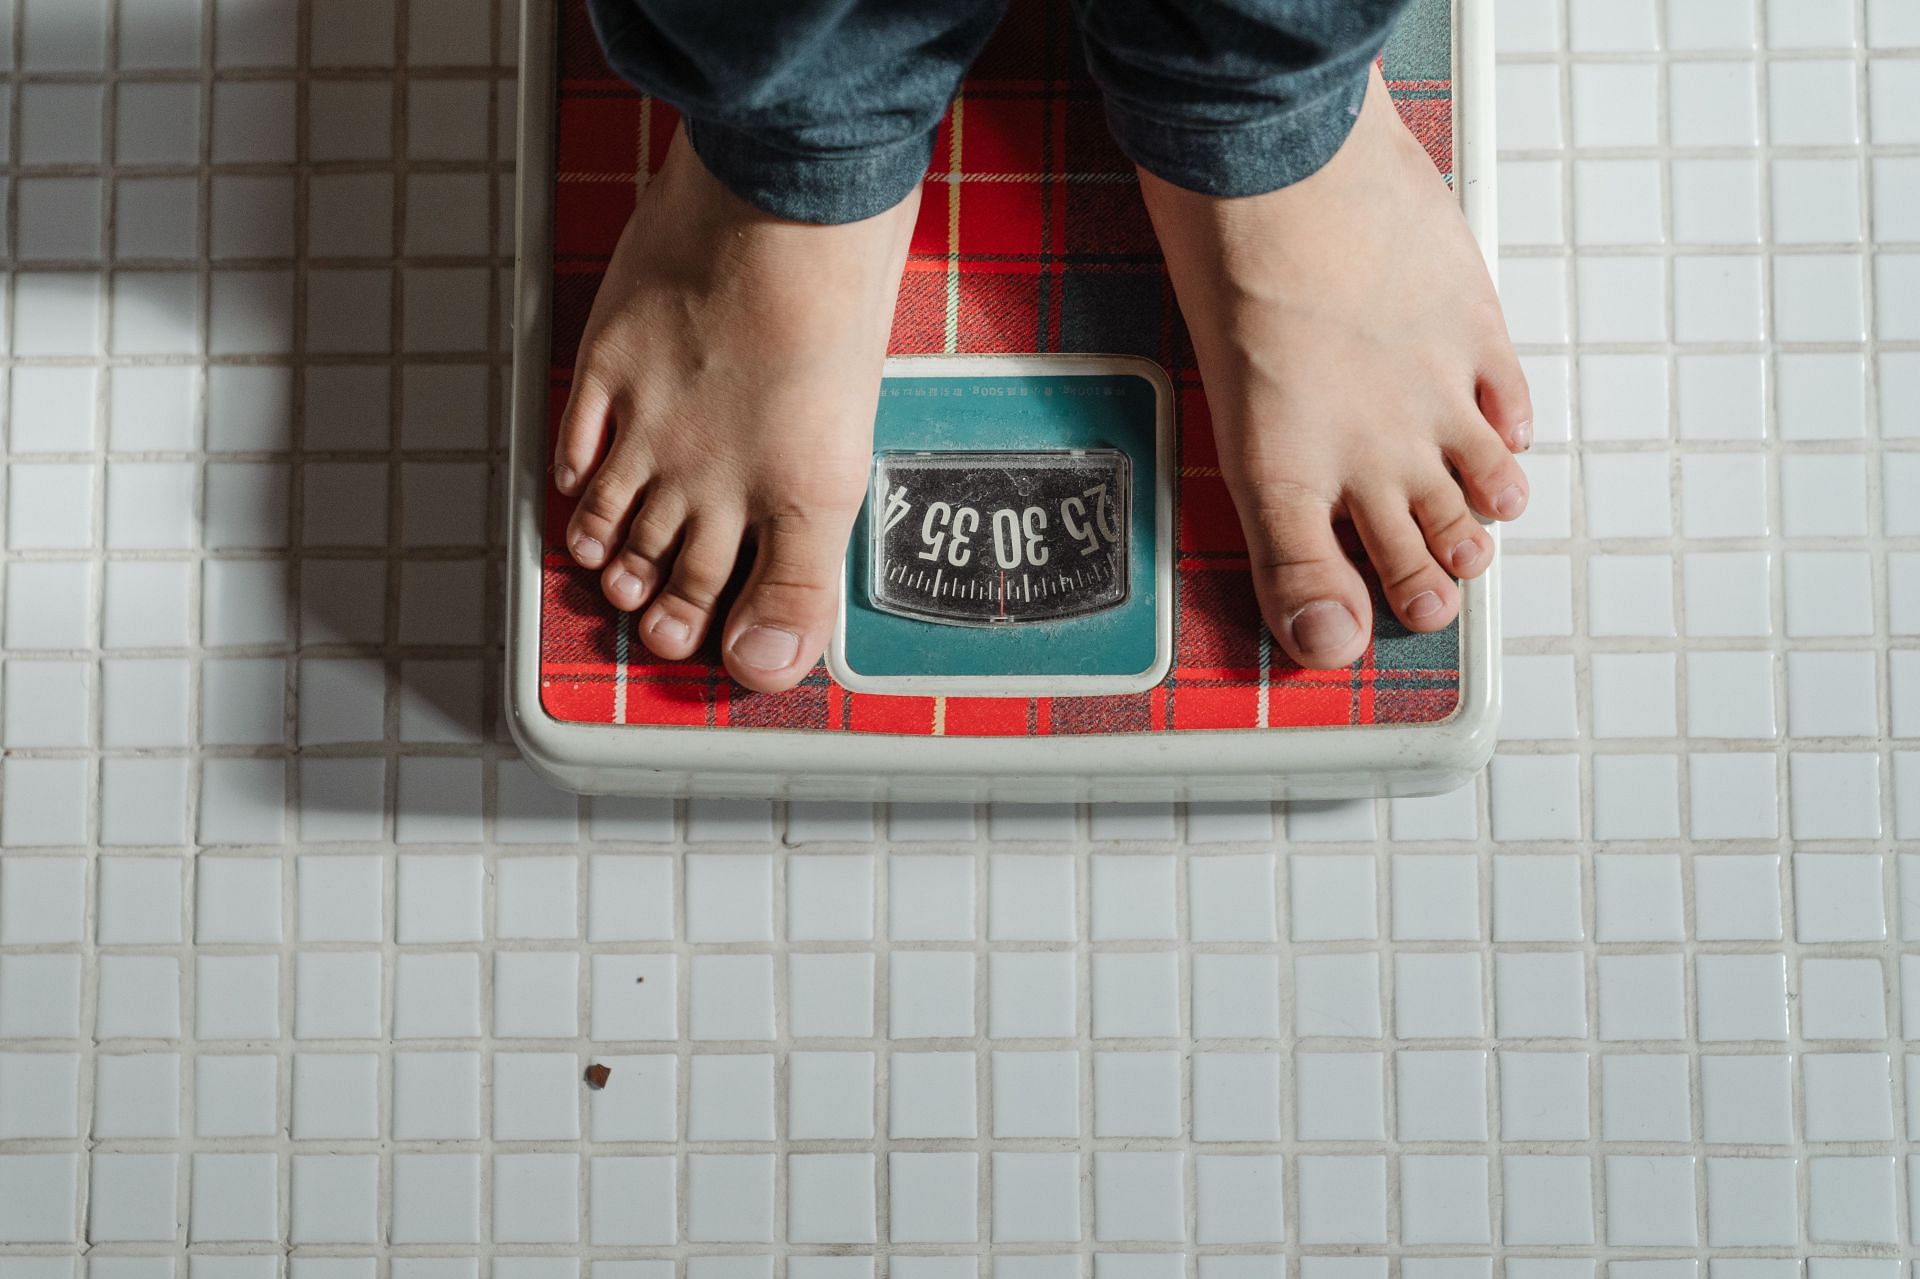 Body mass index has become an obsolete method of measuring health (Image by Ketut Subiyanto)